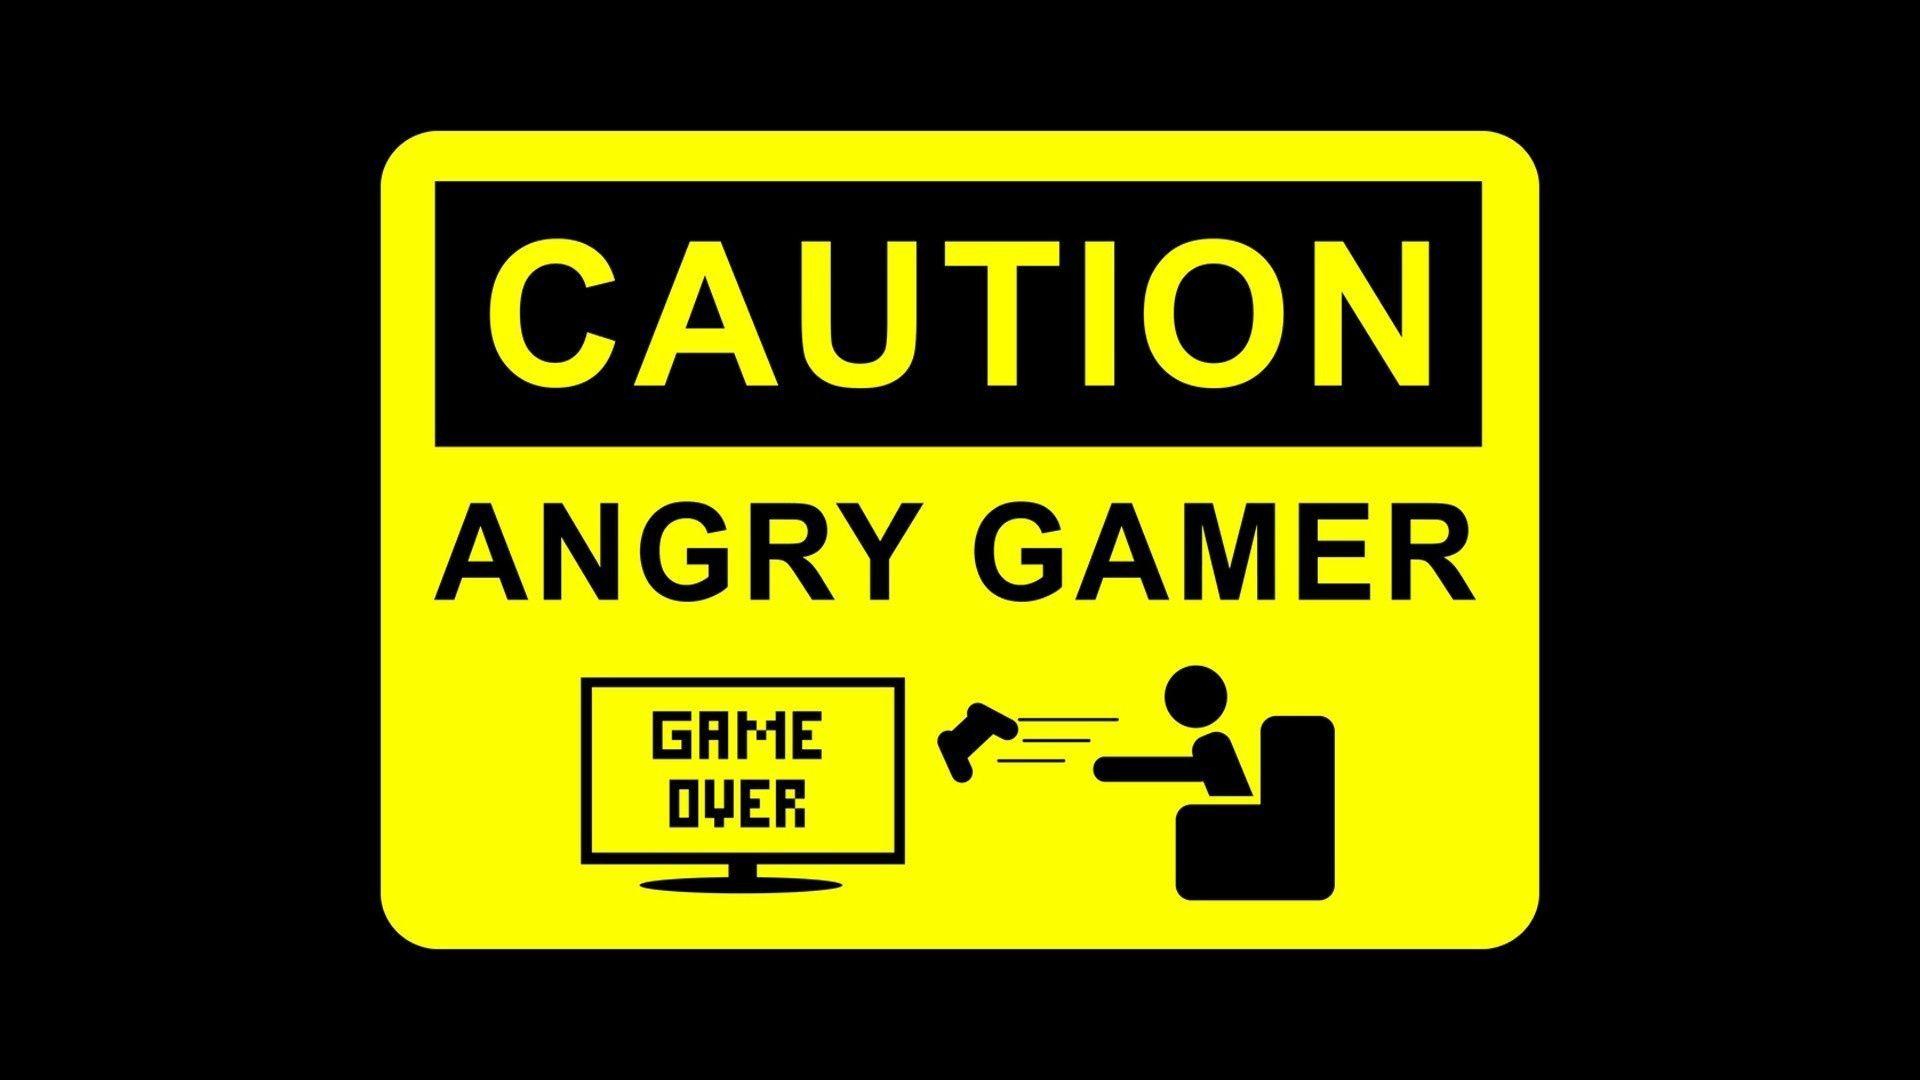 Caution Angry Gamer wallpaper